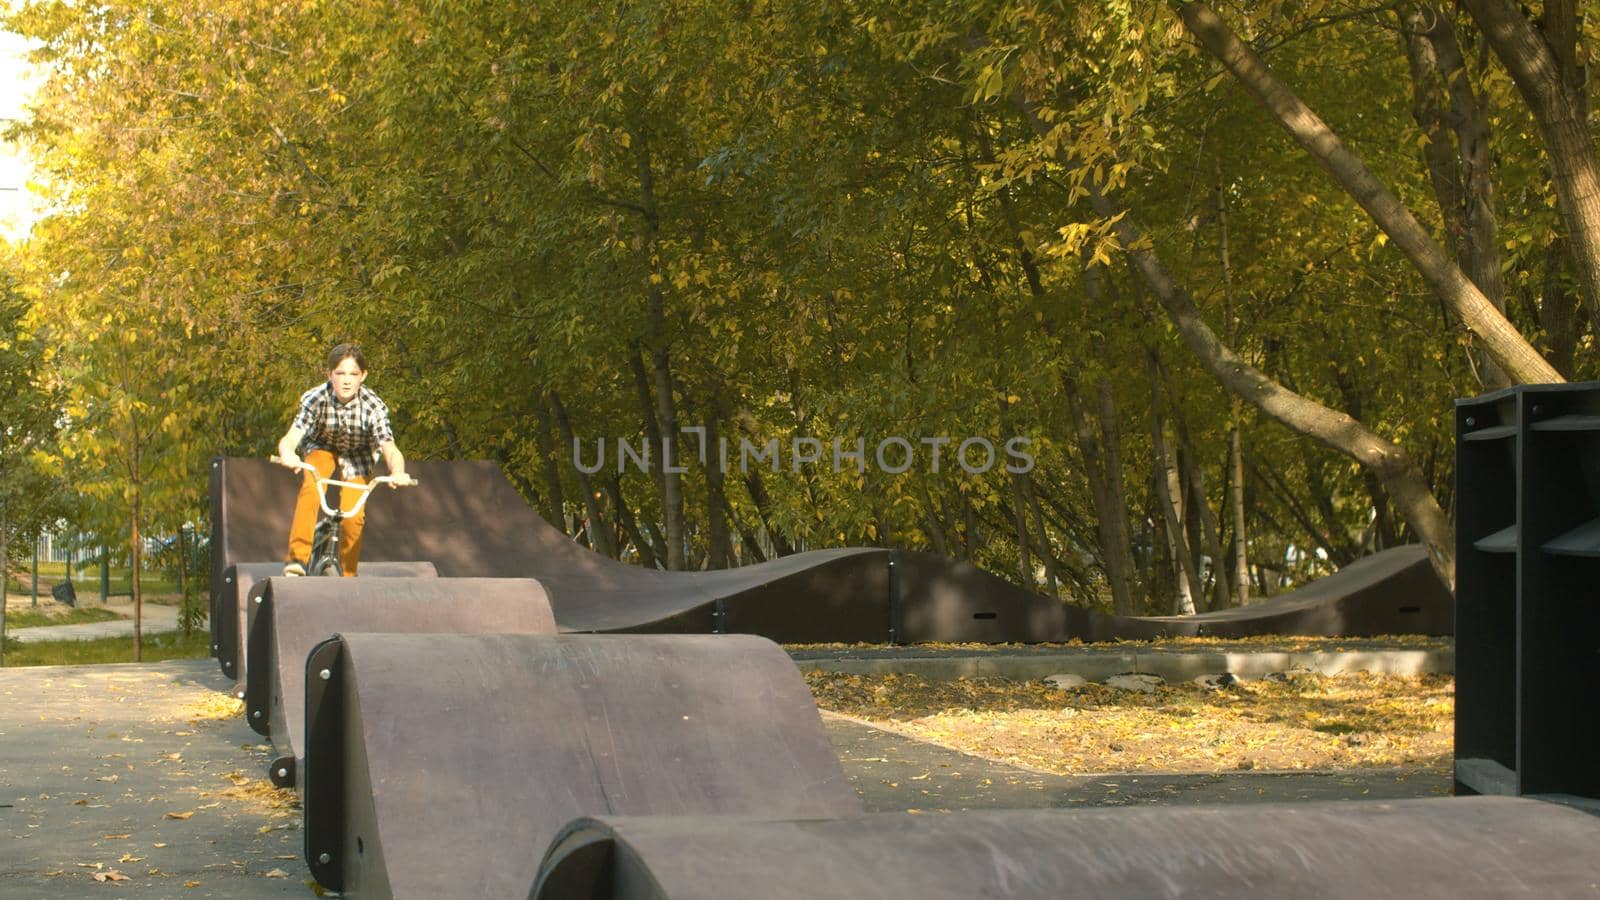 Biker riding on the pump track by Alize